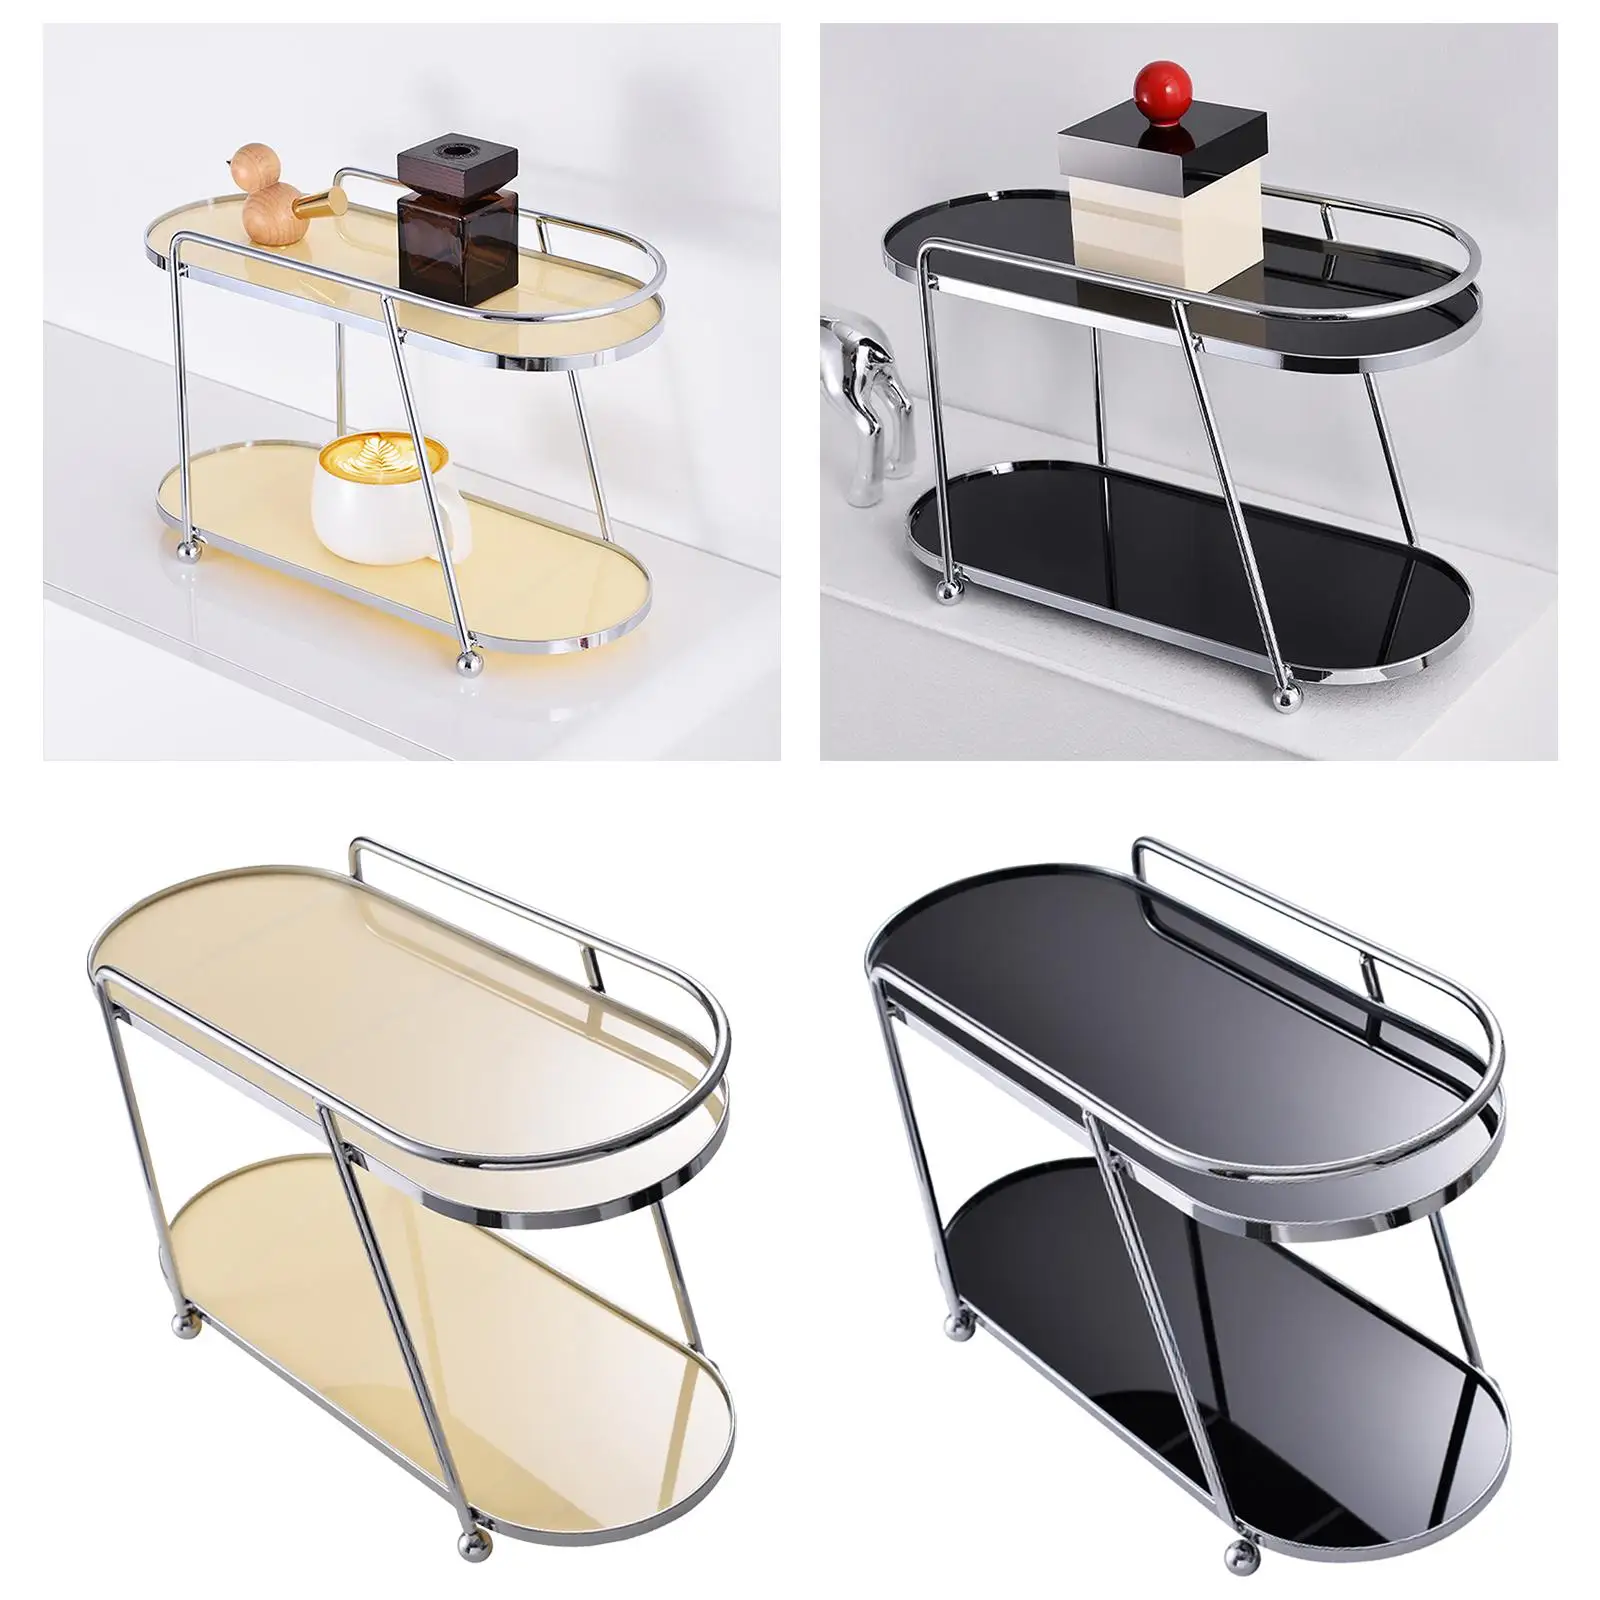 Bathroom Counter Organizer 2 Tiers Home Storage and Display Buffet Serving Tray Multiuse Table Storage Trays for Dresser